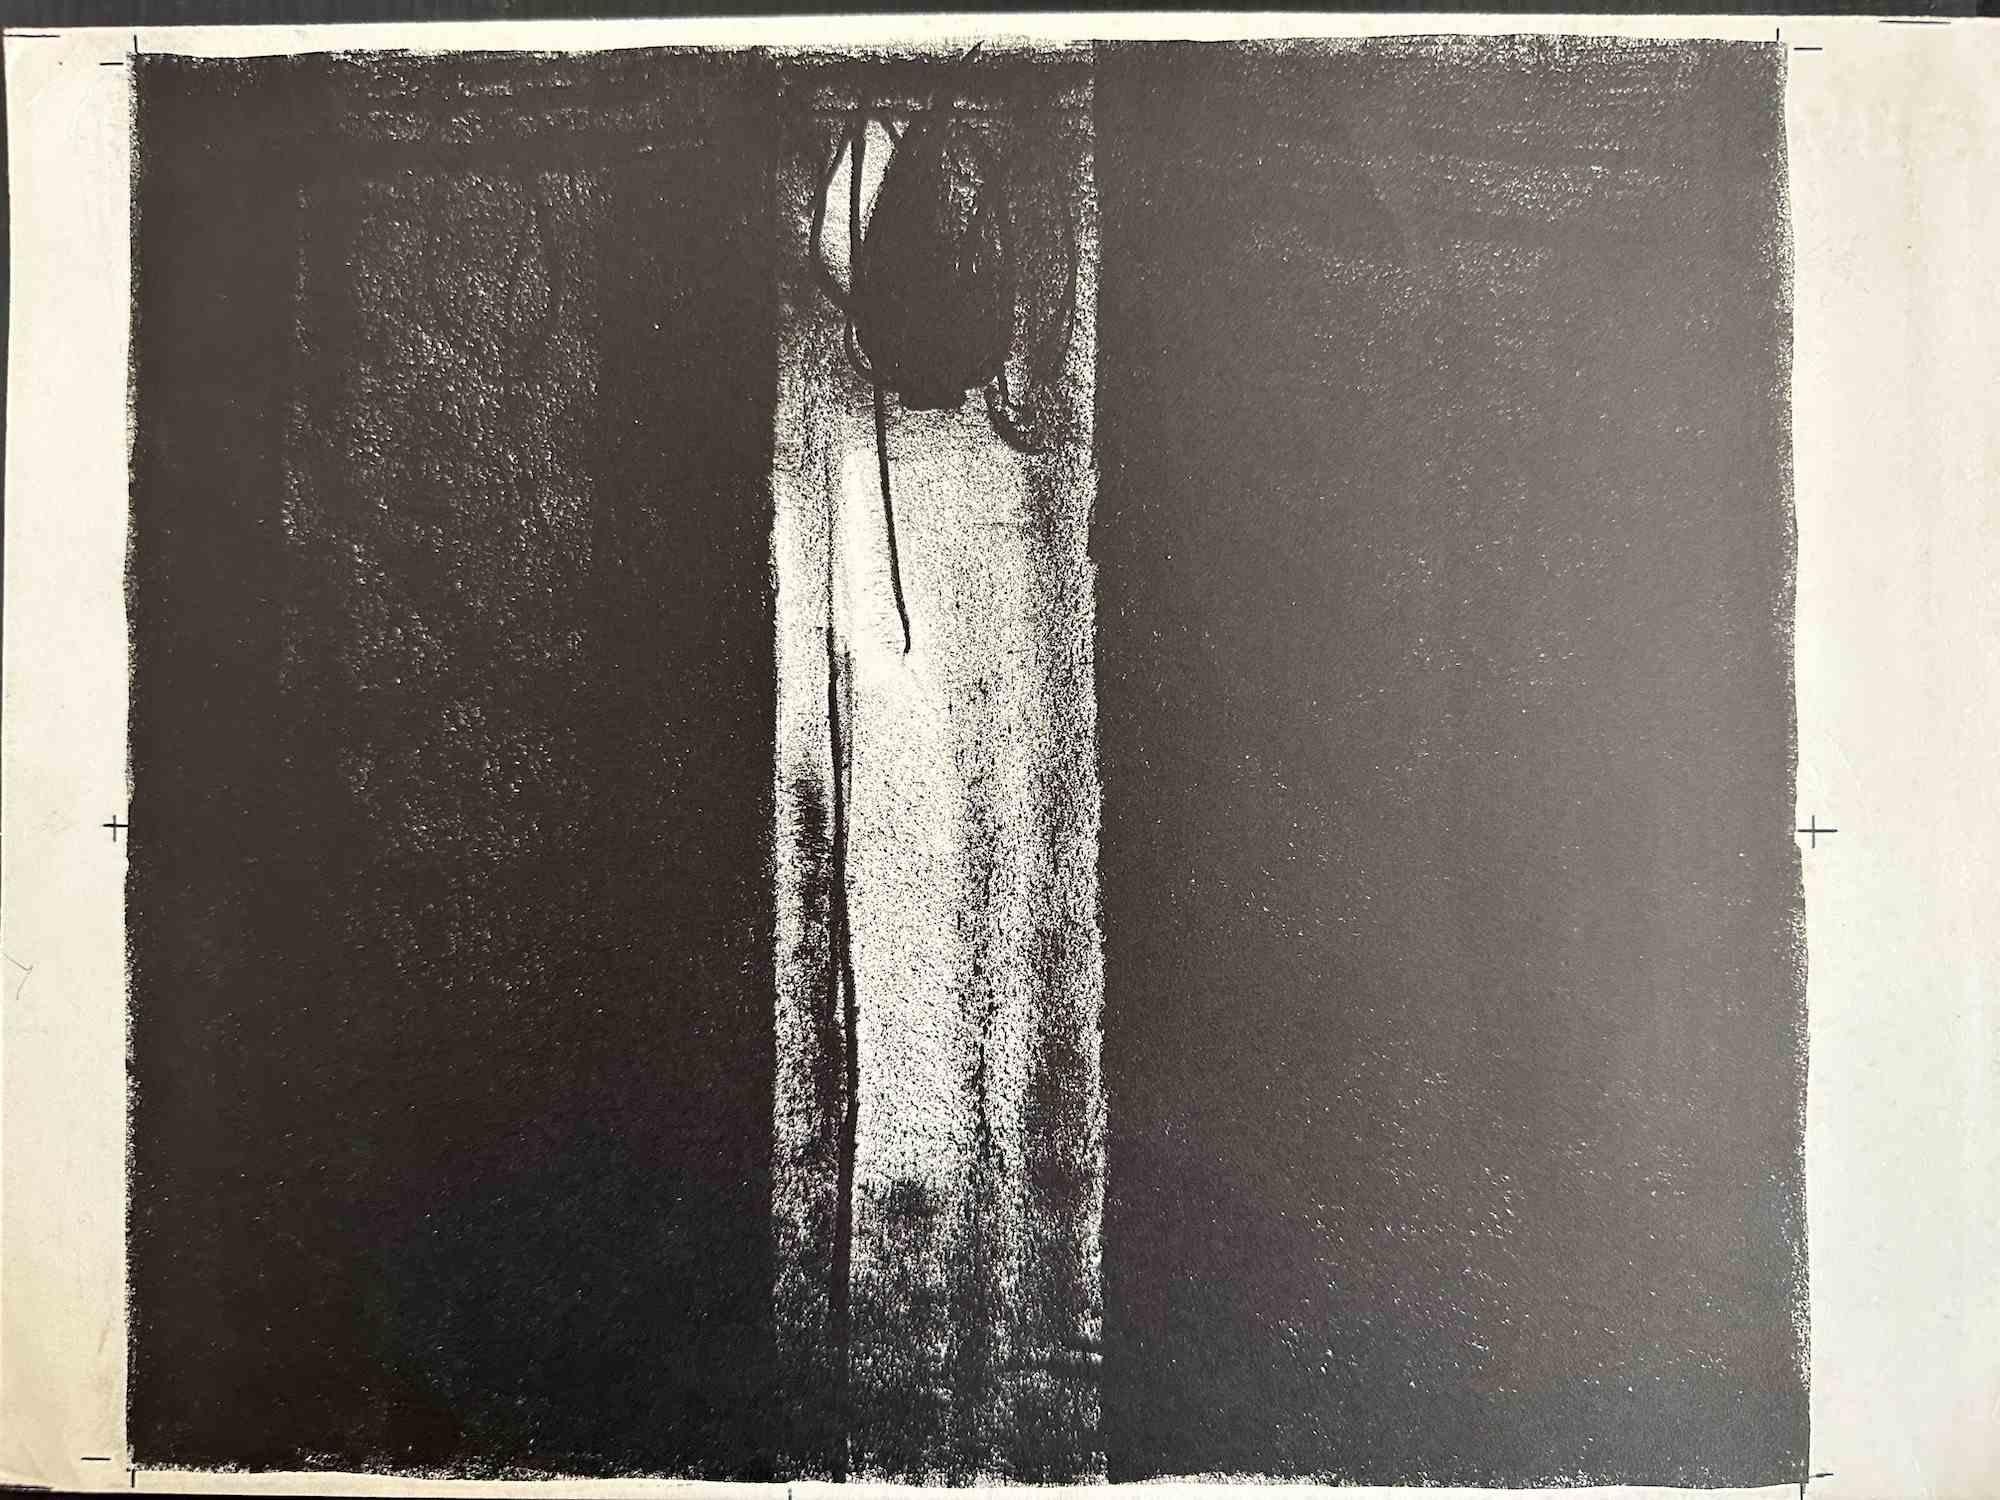 Light in Darkness is a lithograph print on paper realized by Pietro Pizzicinnella in 1983 and Dedicated to Marisa Busanel.

Good conditions with aged margins.

The artwork is represented poetically in a minimalistic authentic style.